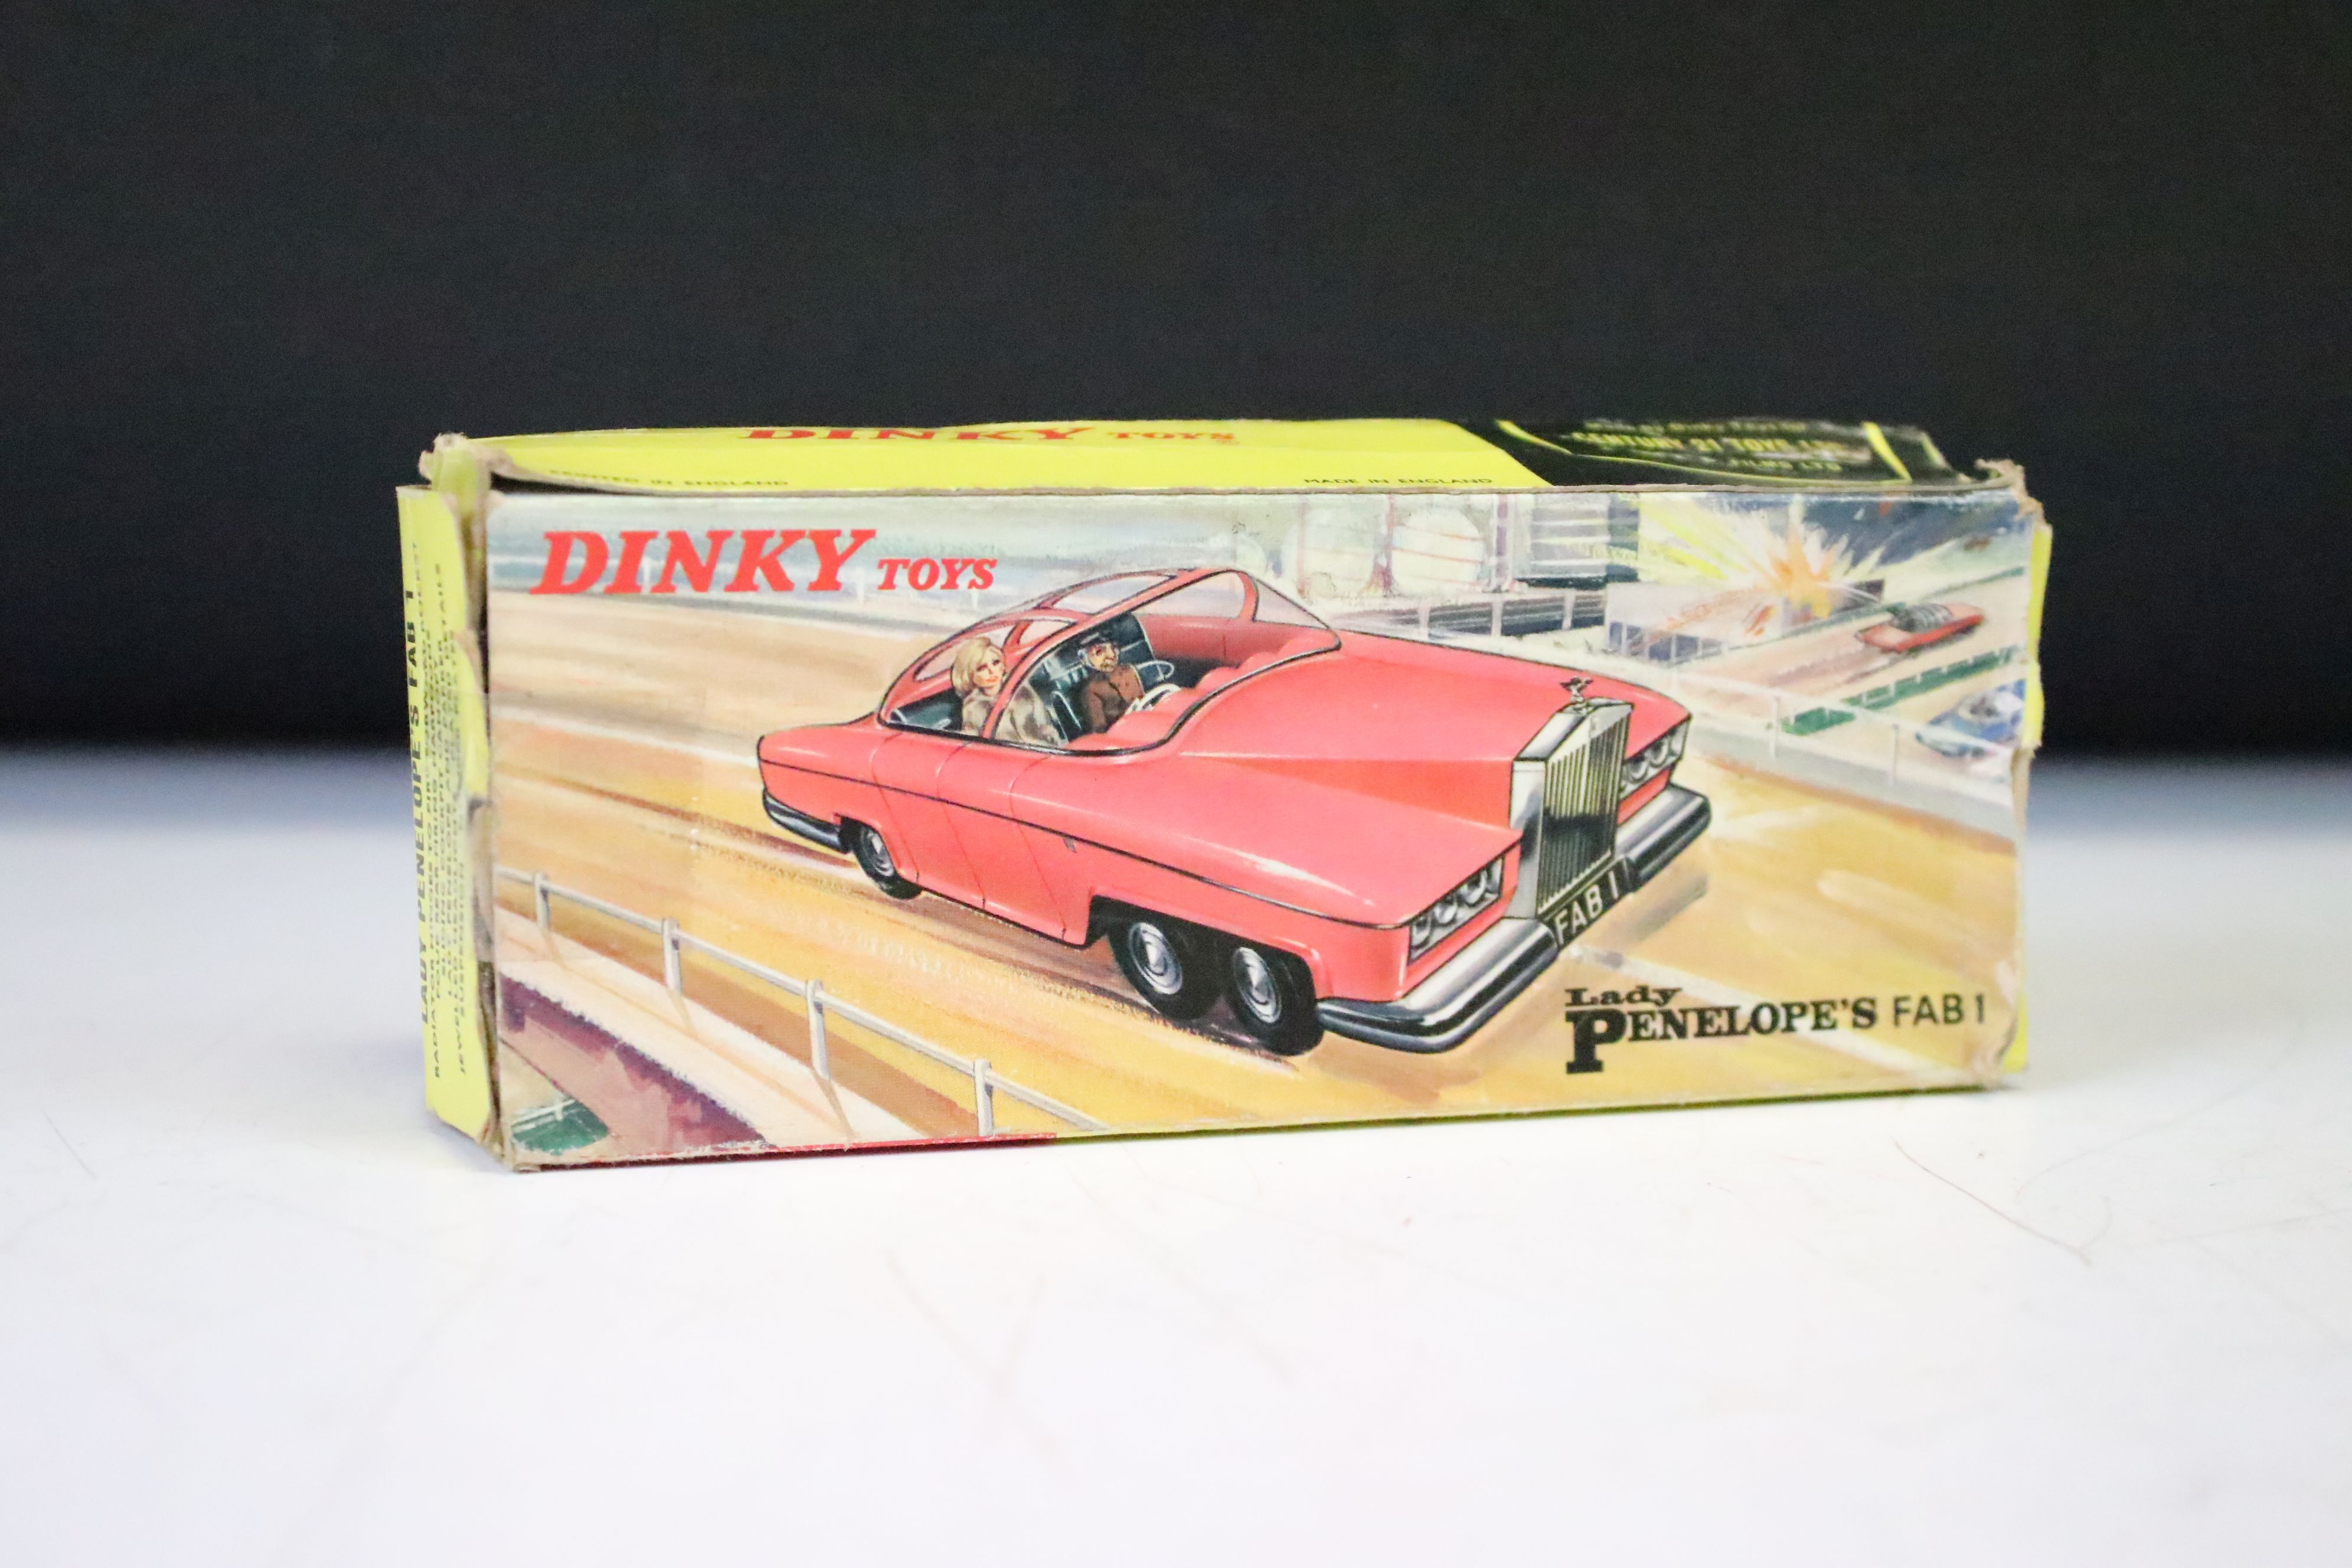 Boxed Dinky 100 Thunderbirds Lady Penelope Fab 1 diecast model, with both figure loose from seat - Image 5 of 5